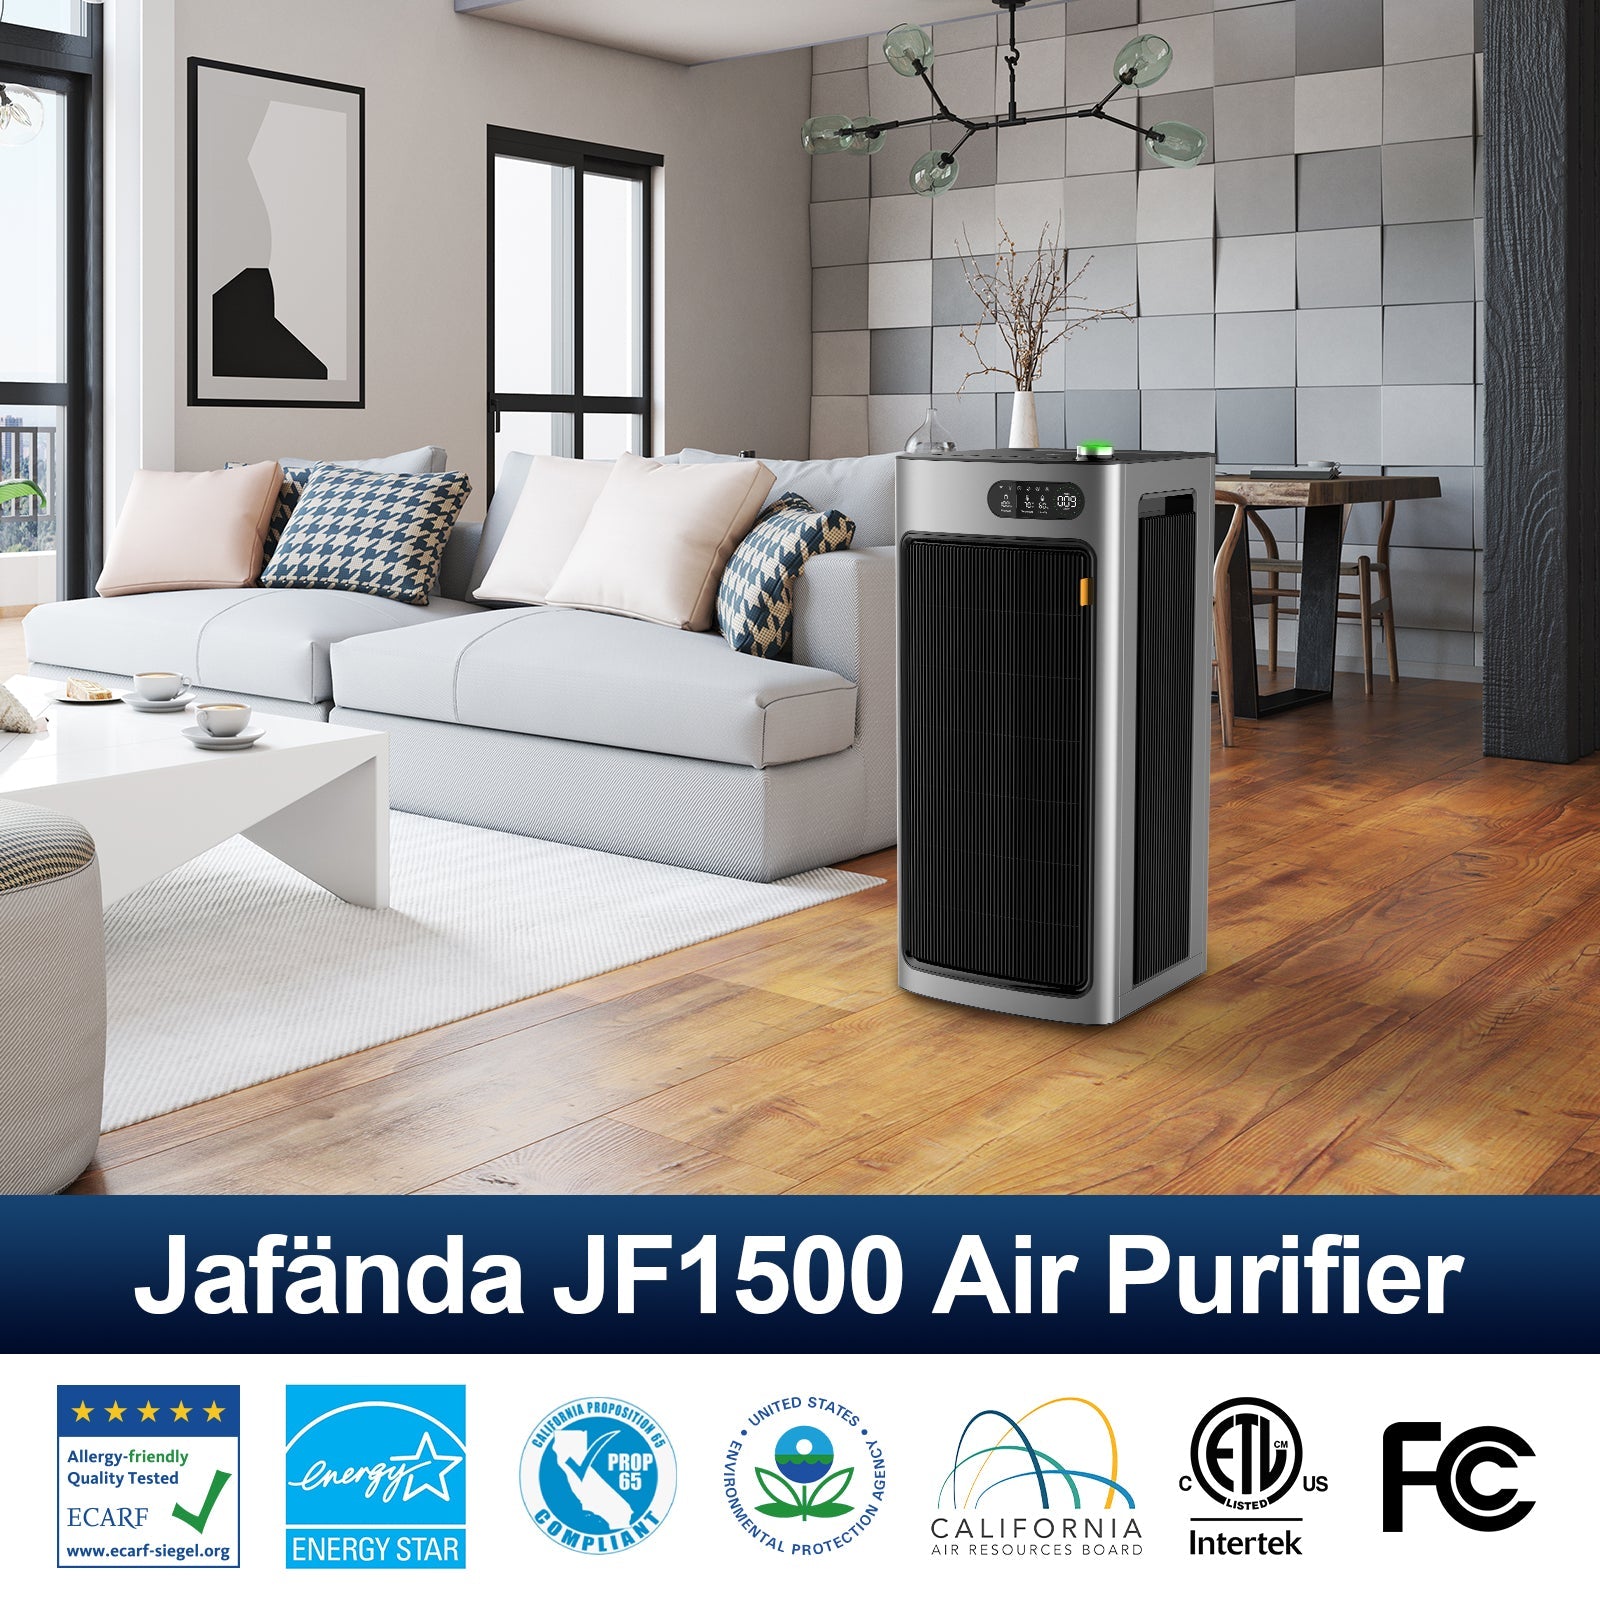 Jafända JF1500 Air Purifier Original Replacement Filters, 2 Pack Filters with H13 True HEPA & 5.51 Ib Activated Carbon, Effectively Remove Allergies, Pollen, Dust, Pet Dander, Pet Odor, VOCs Smoke, Ideal for Households with Pets, Cooking, and Smokers. - Jafanda